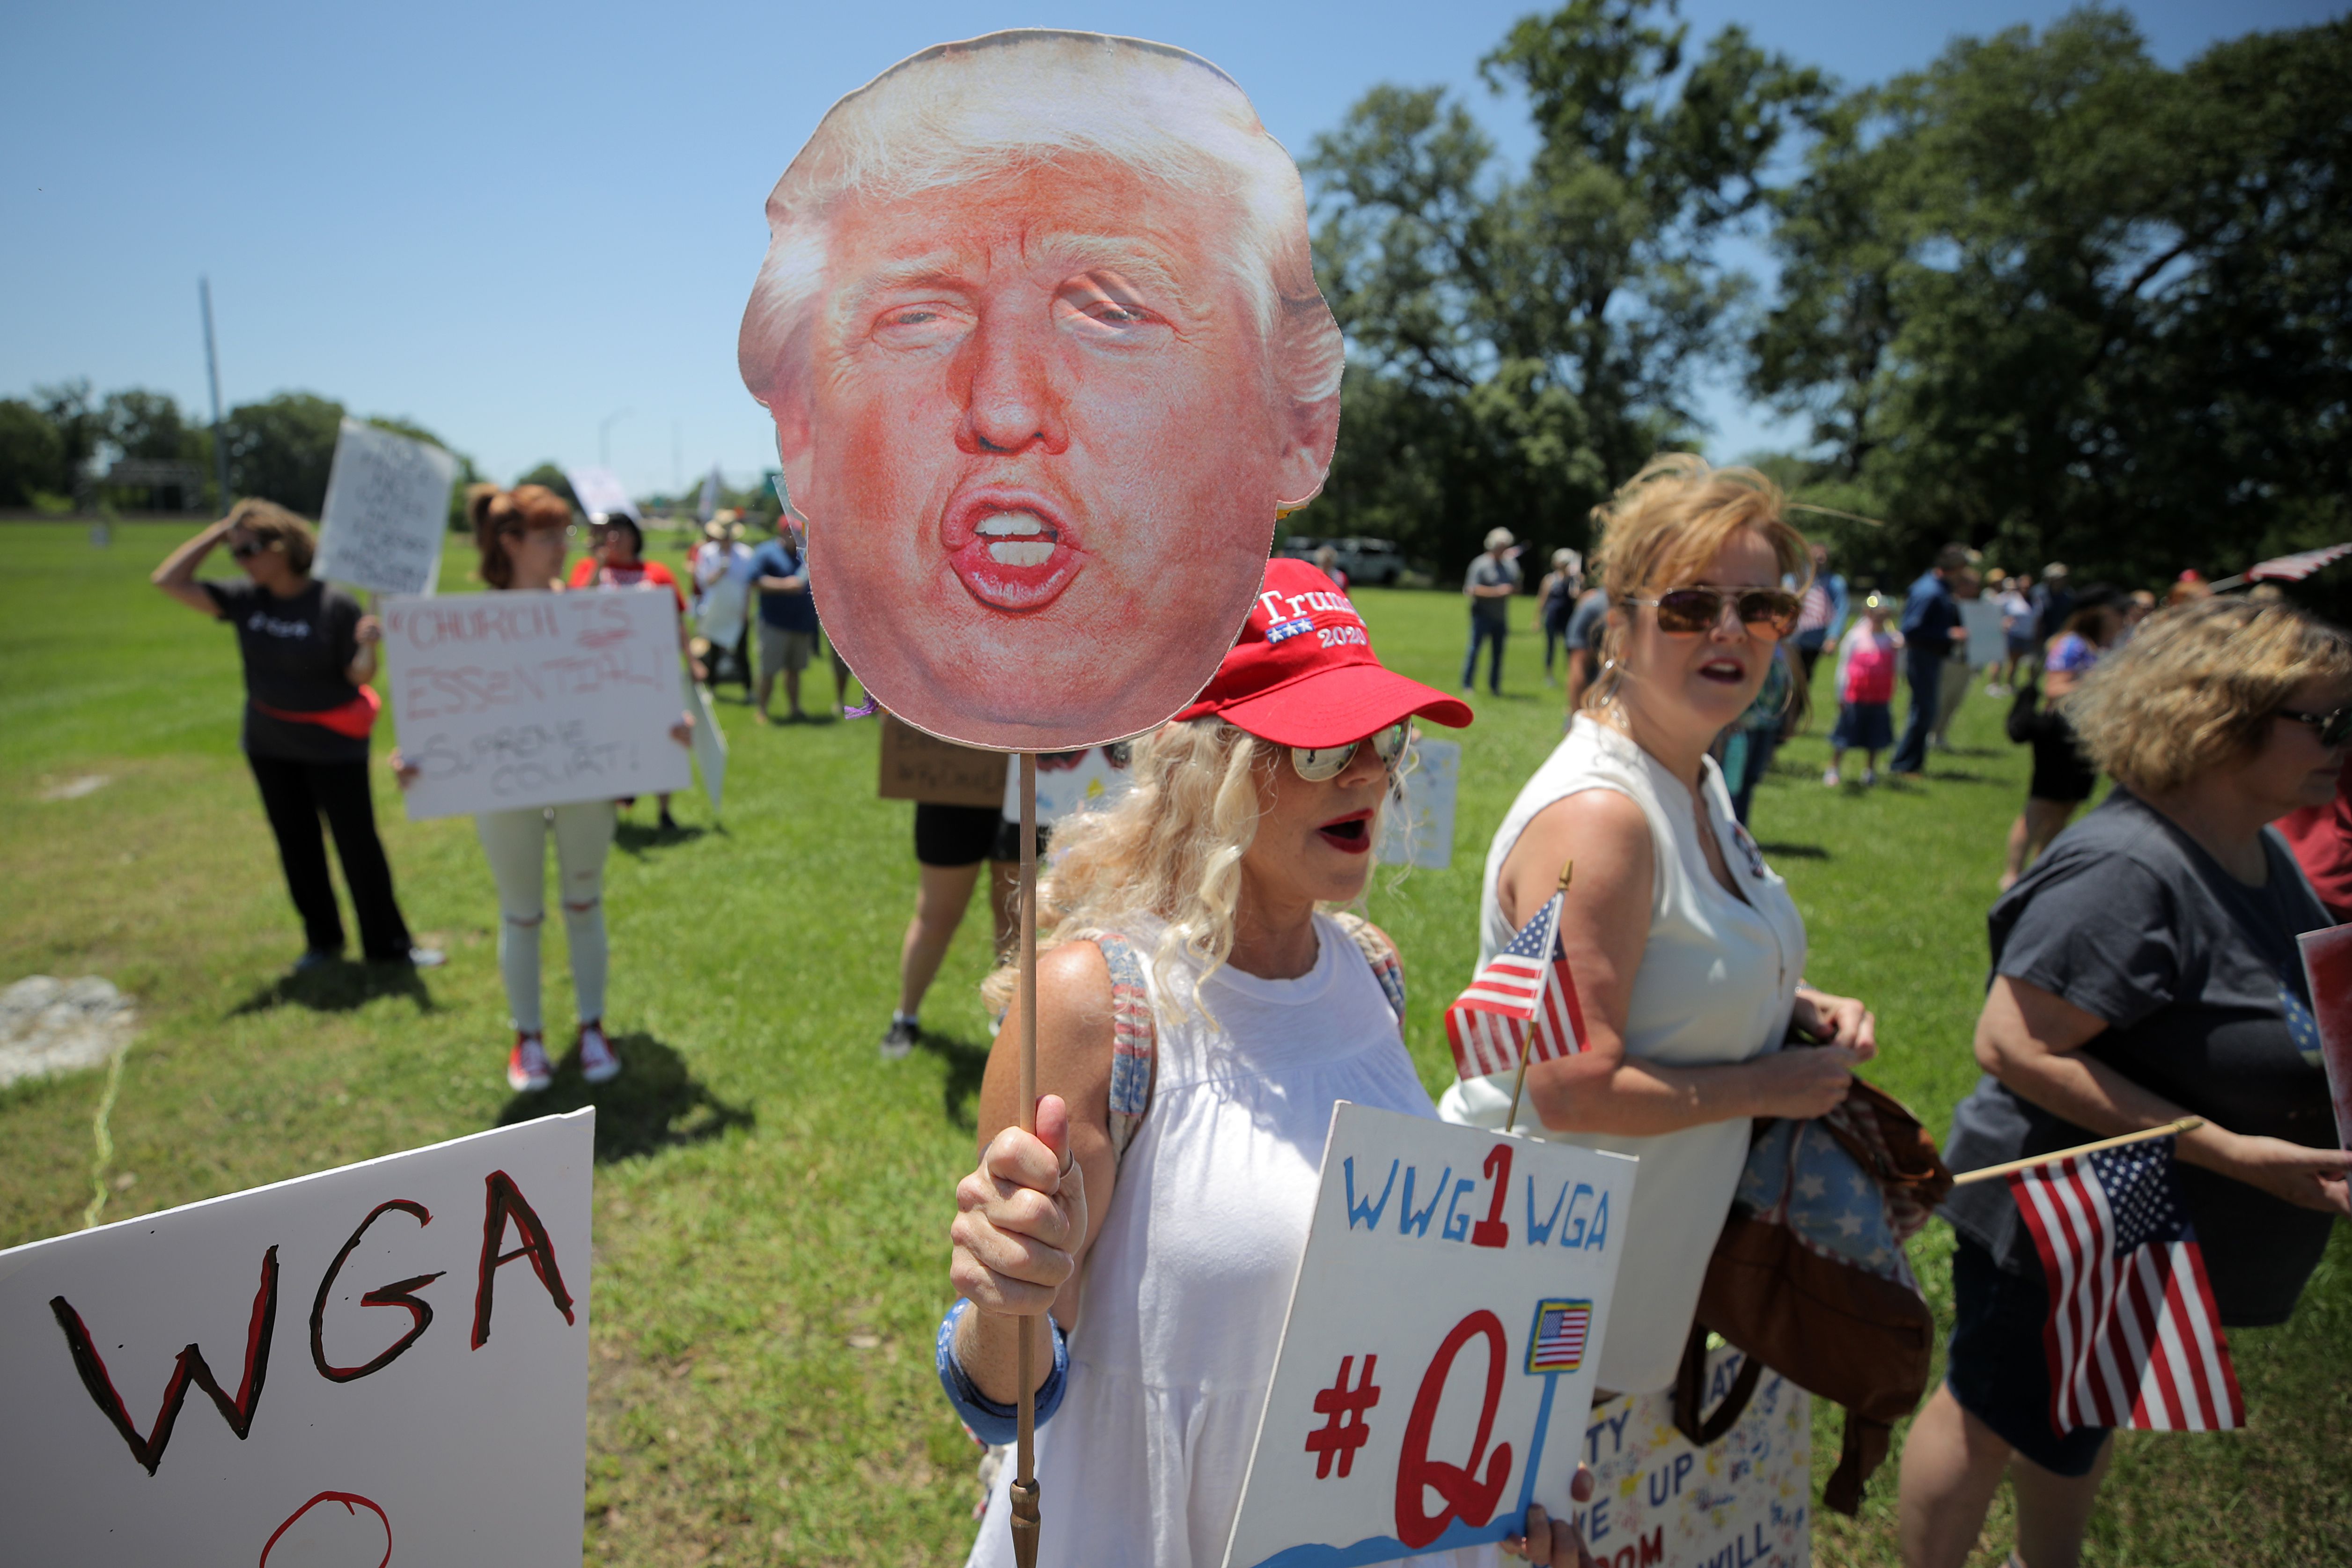 In this image, a woman holds a sign of Trump's face